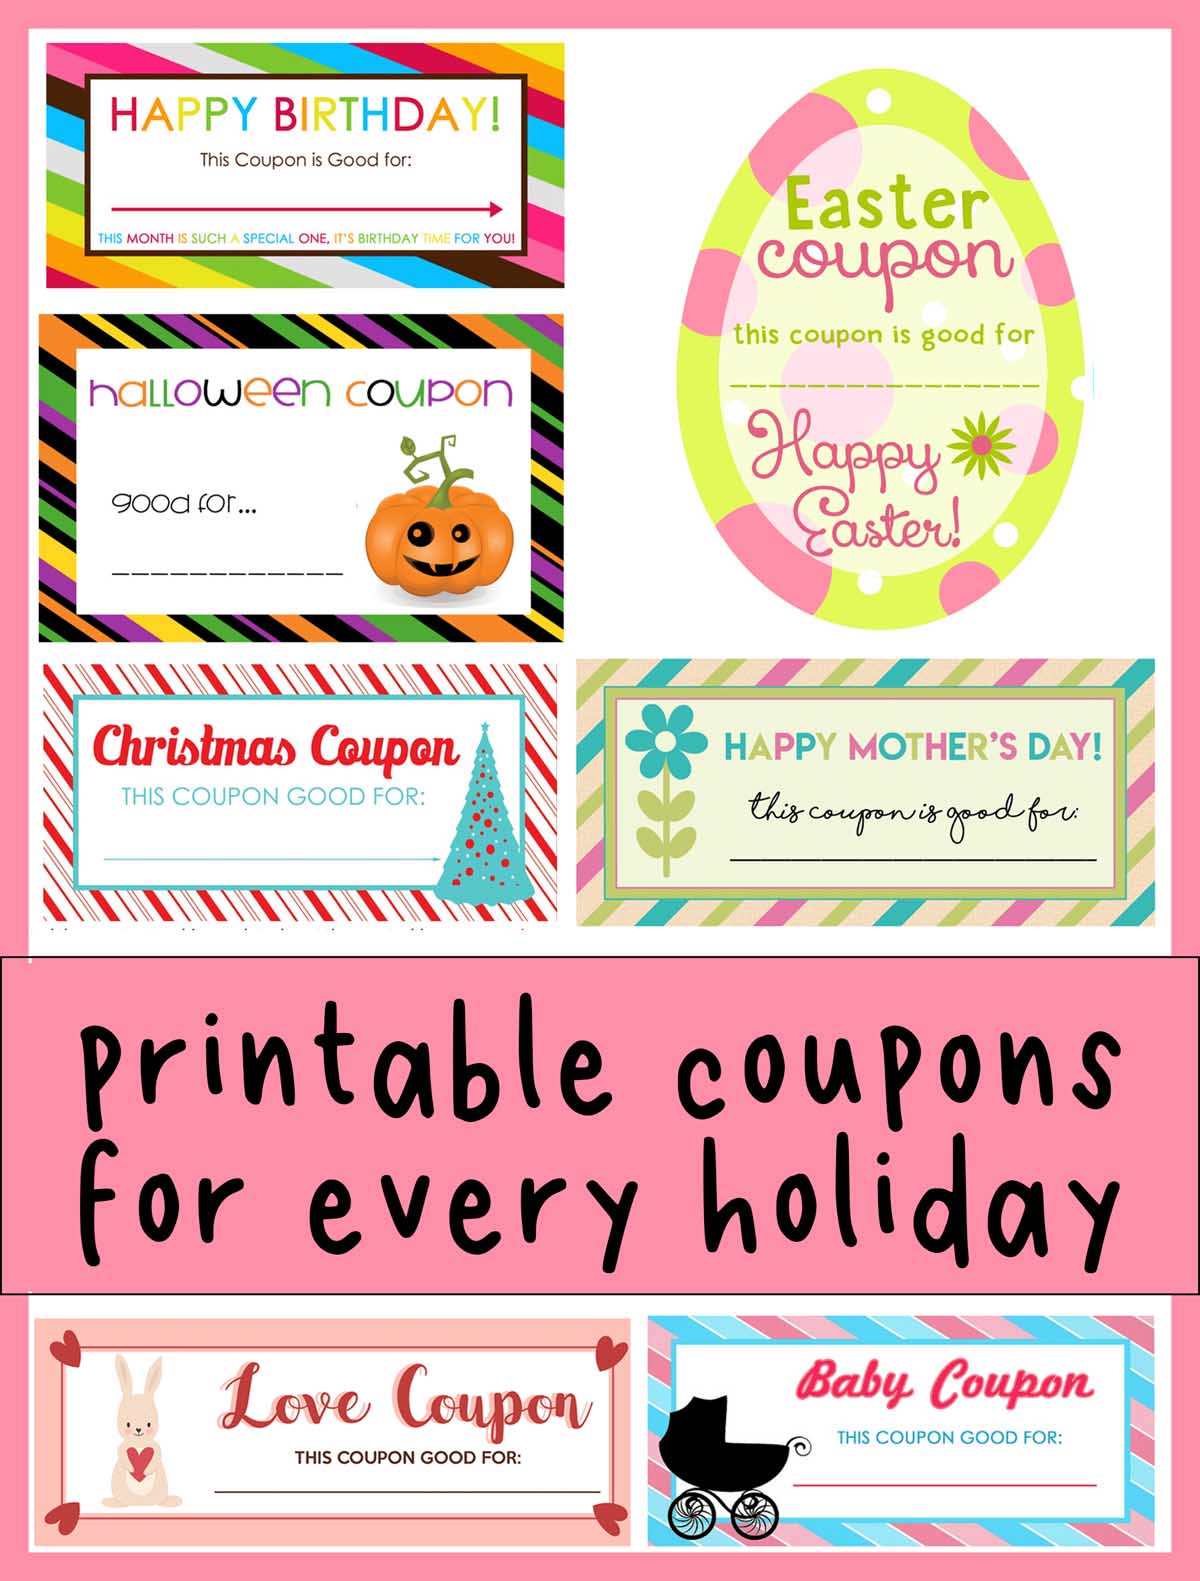 Use these printable Halloween coupons to give your children experience gifts for Halloween instead of more candy and sugar. via @lara_neves